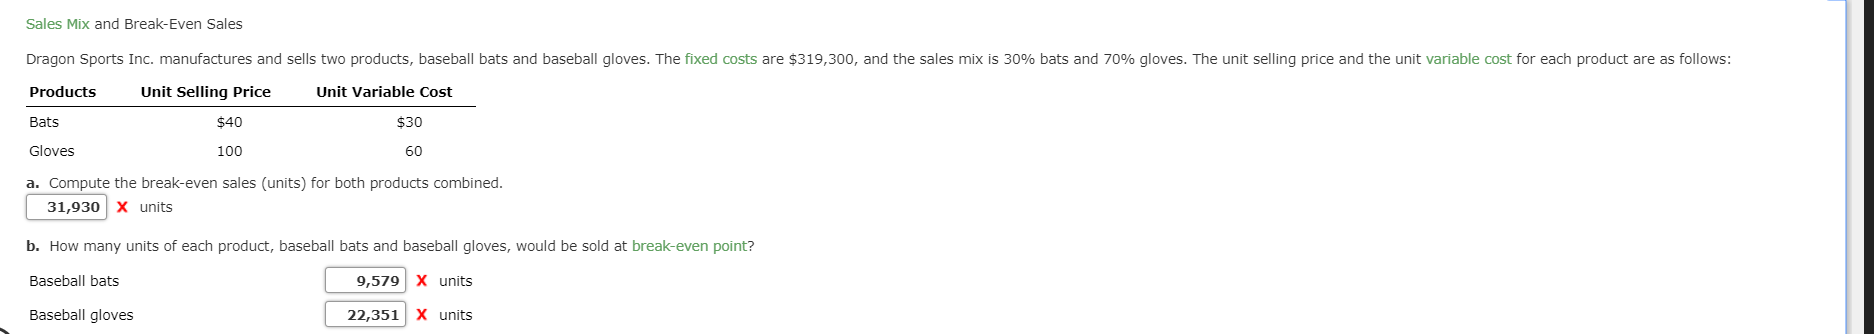 Sales Mix and Break-Even Sales
Dragon Sports Inc. manufactures and sells two products, baseball bats and baseball gloves. The fixed costs are $319,300, and the sales mix is 30% bats and 70% gloves. The unit selling price and the unit variable cost for each product are as follows:
Products
Unit Selling Price
Unit Variable Cost
$40
$30
Bats
Gloves
100
60
a. Compute the break-even sales (units) for both products combined.
31,930 X units
b. How many units of each product, baseball bats and baseball gloves, would be sold at break-even point?
9,579 X units
Baseball bats
22,351 X units
Baseball gloves
